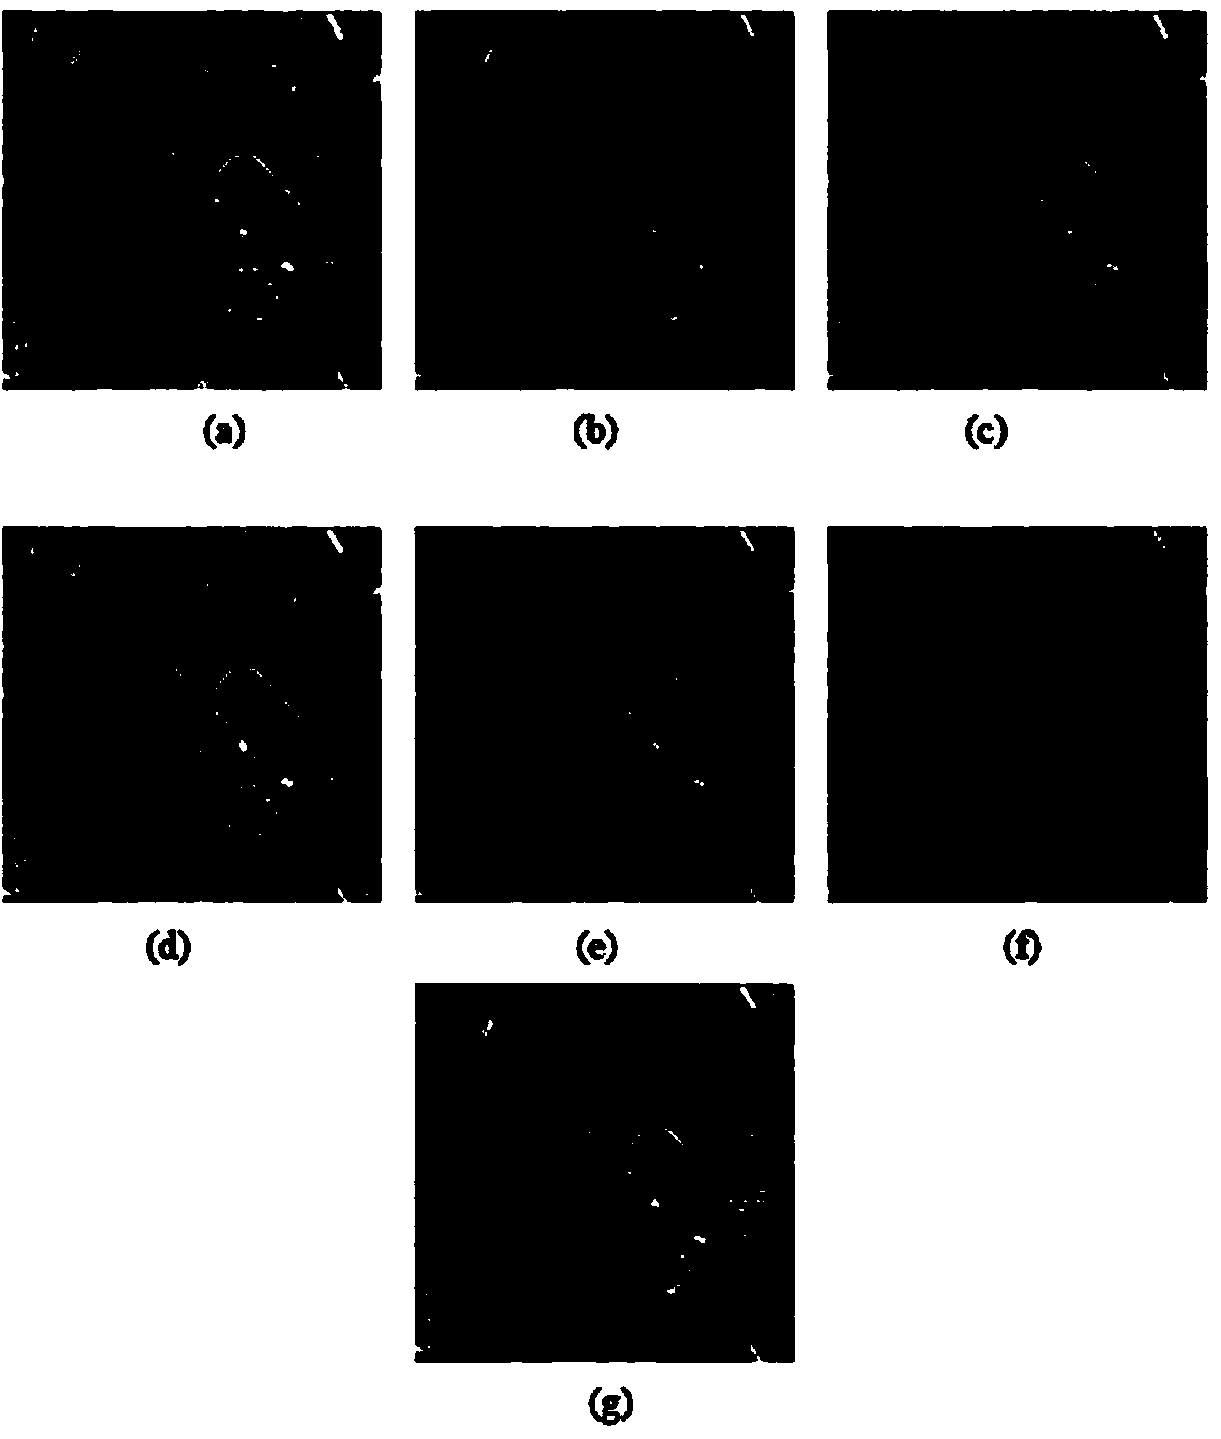 Method for fusing Shearlet domain multi-spectral and full-color images based on spectral characteristics